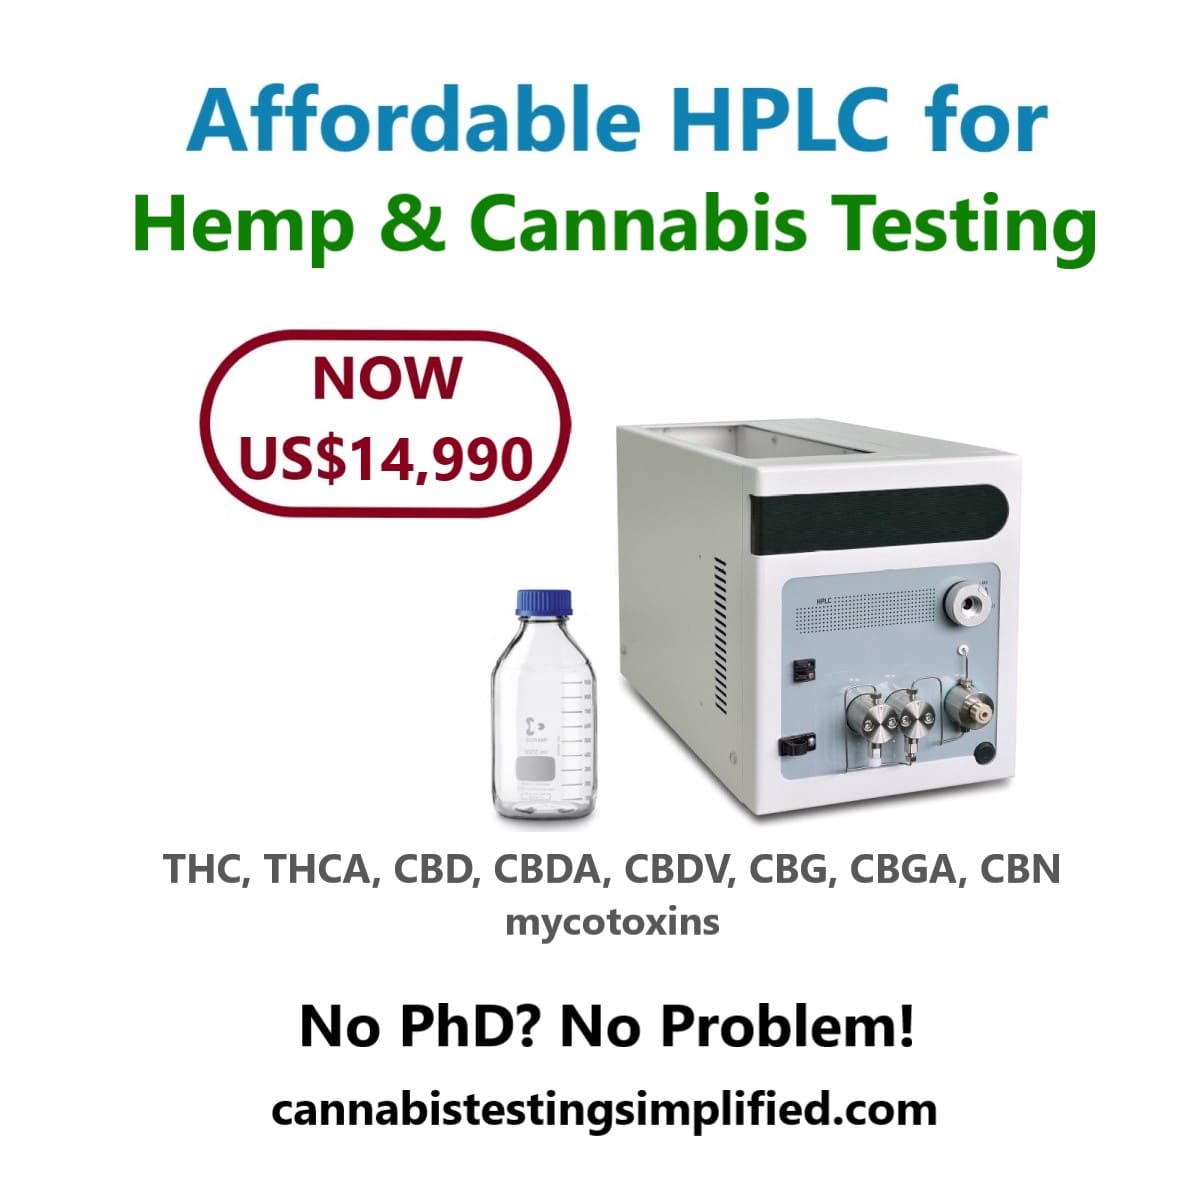 Affordable HPLC for farmers and hemp growers